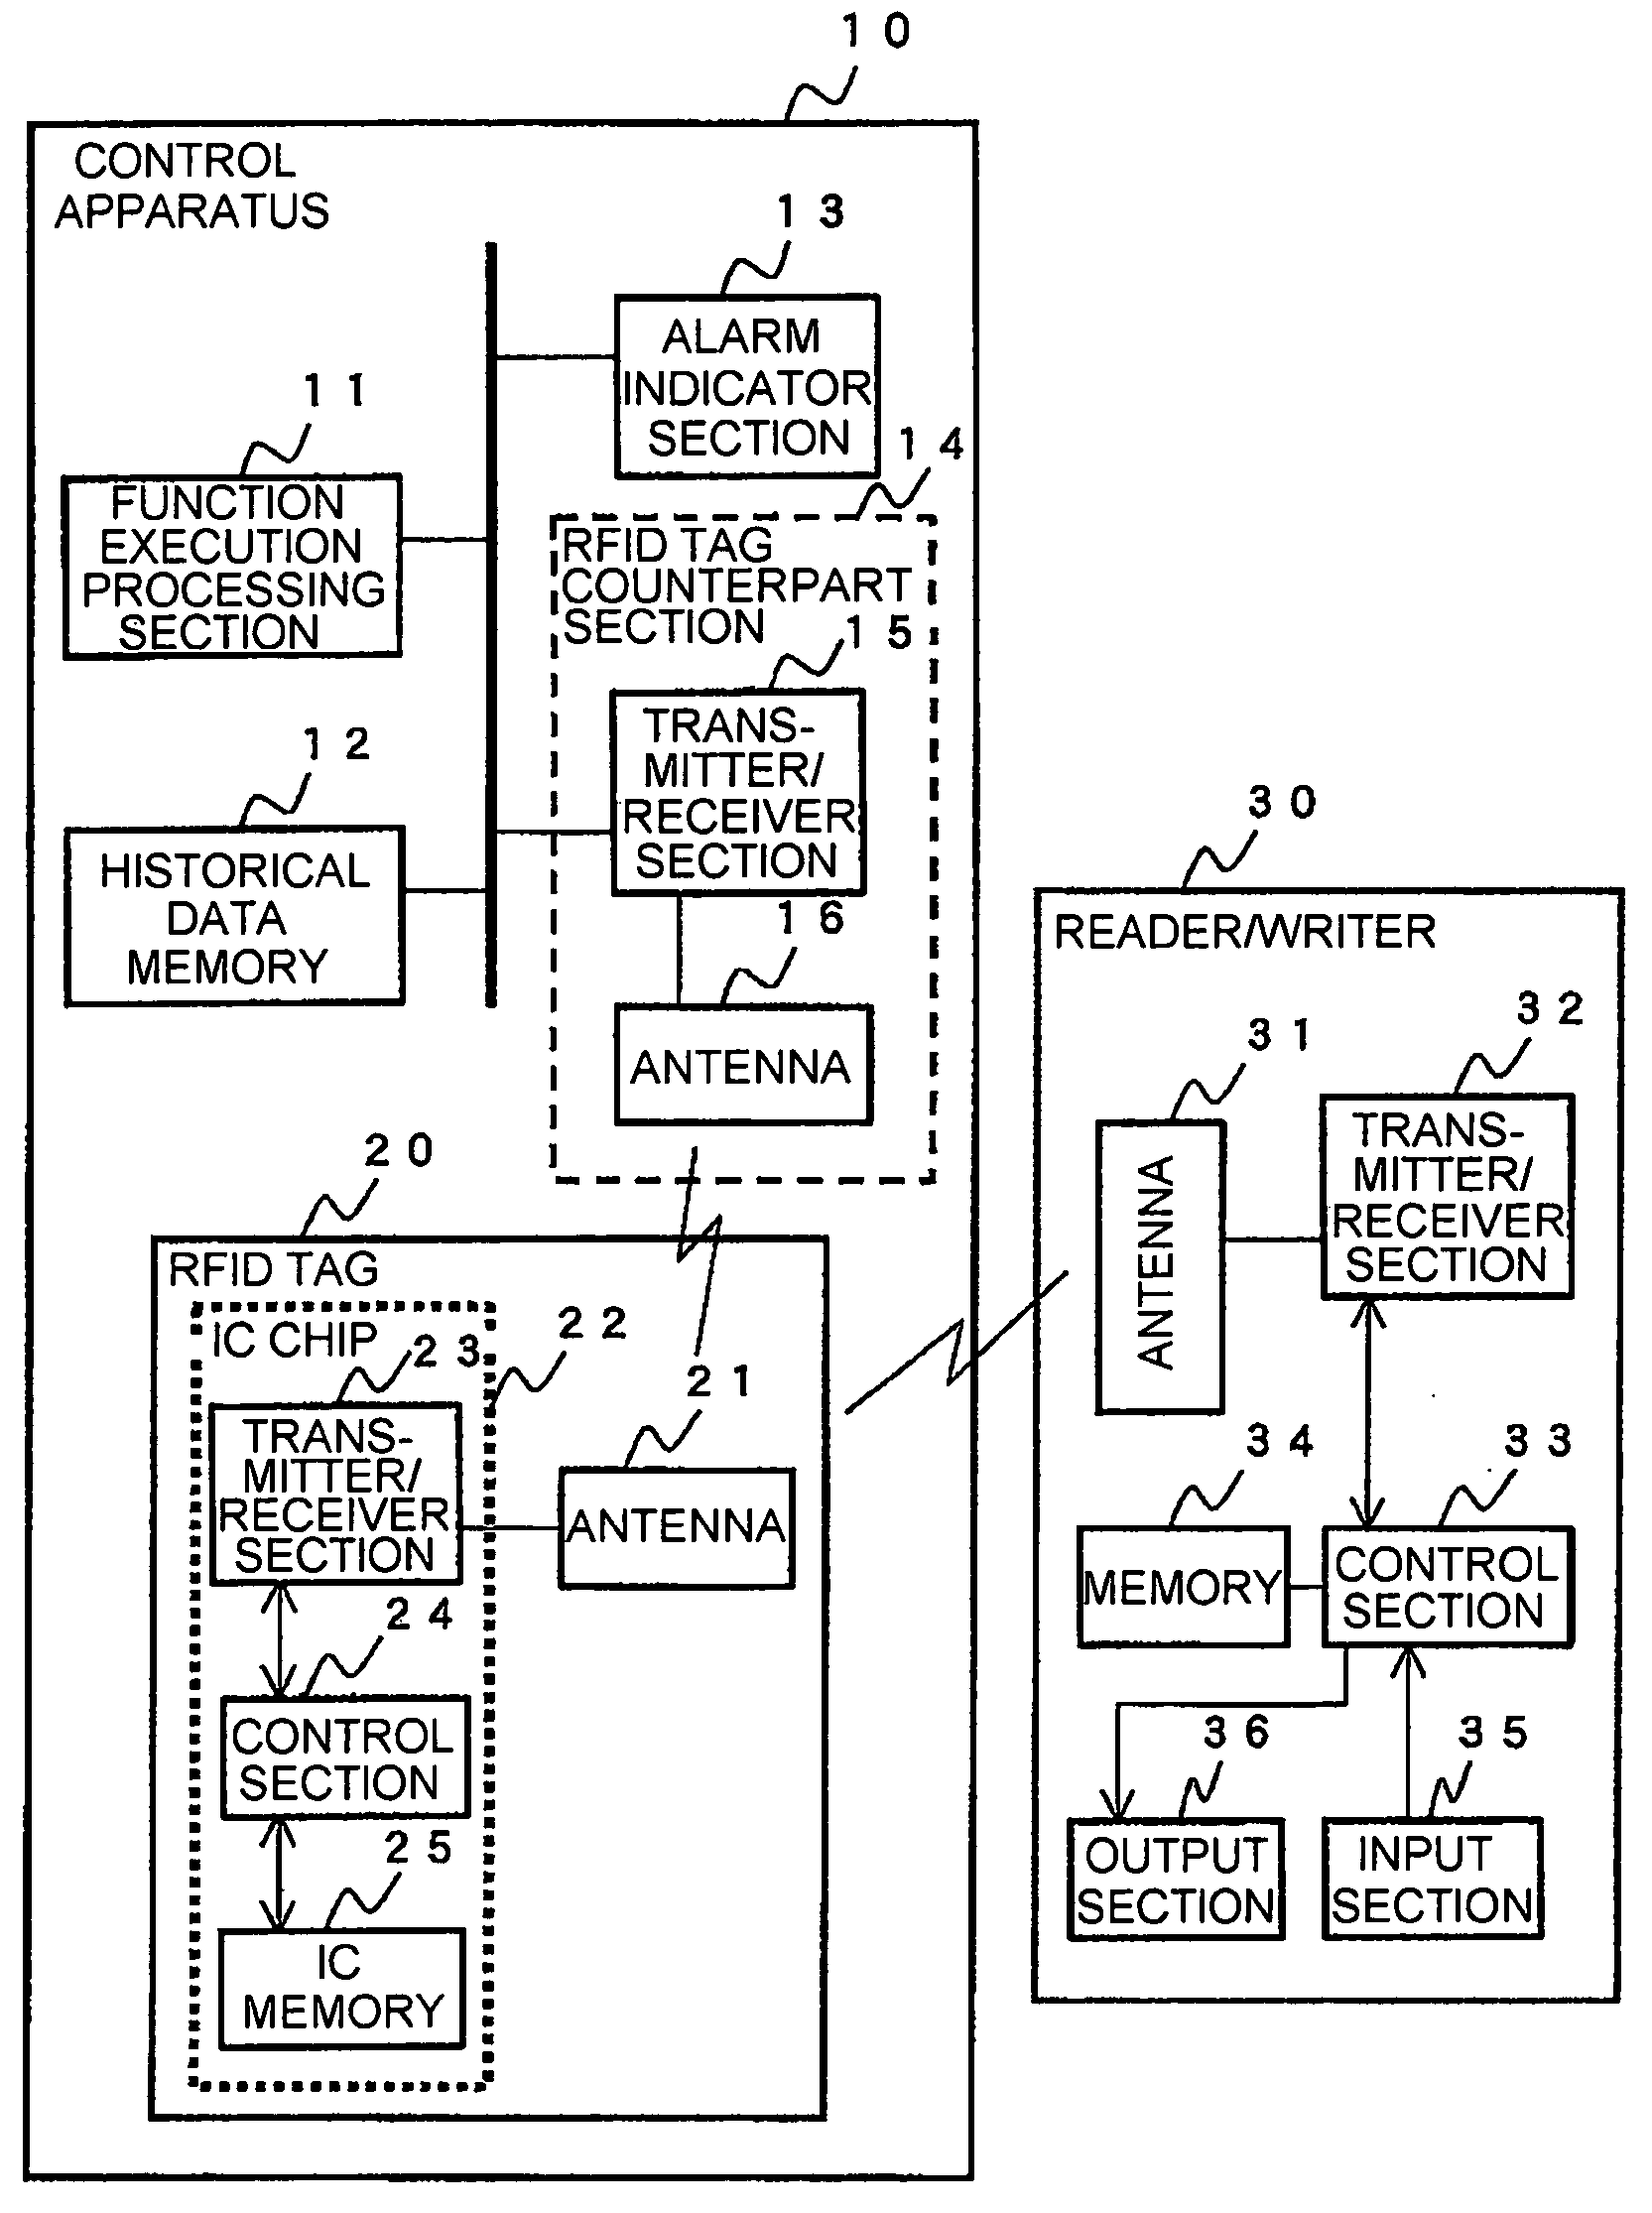 Method and system for acquiring maintenance information by an RFID tag